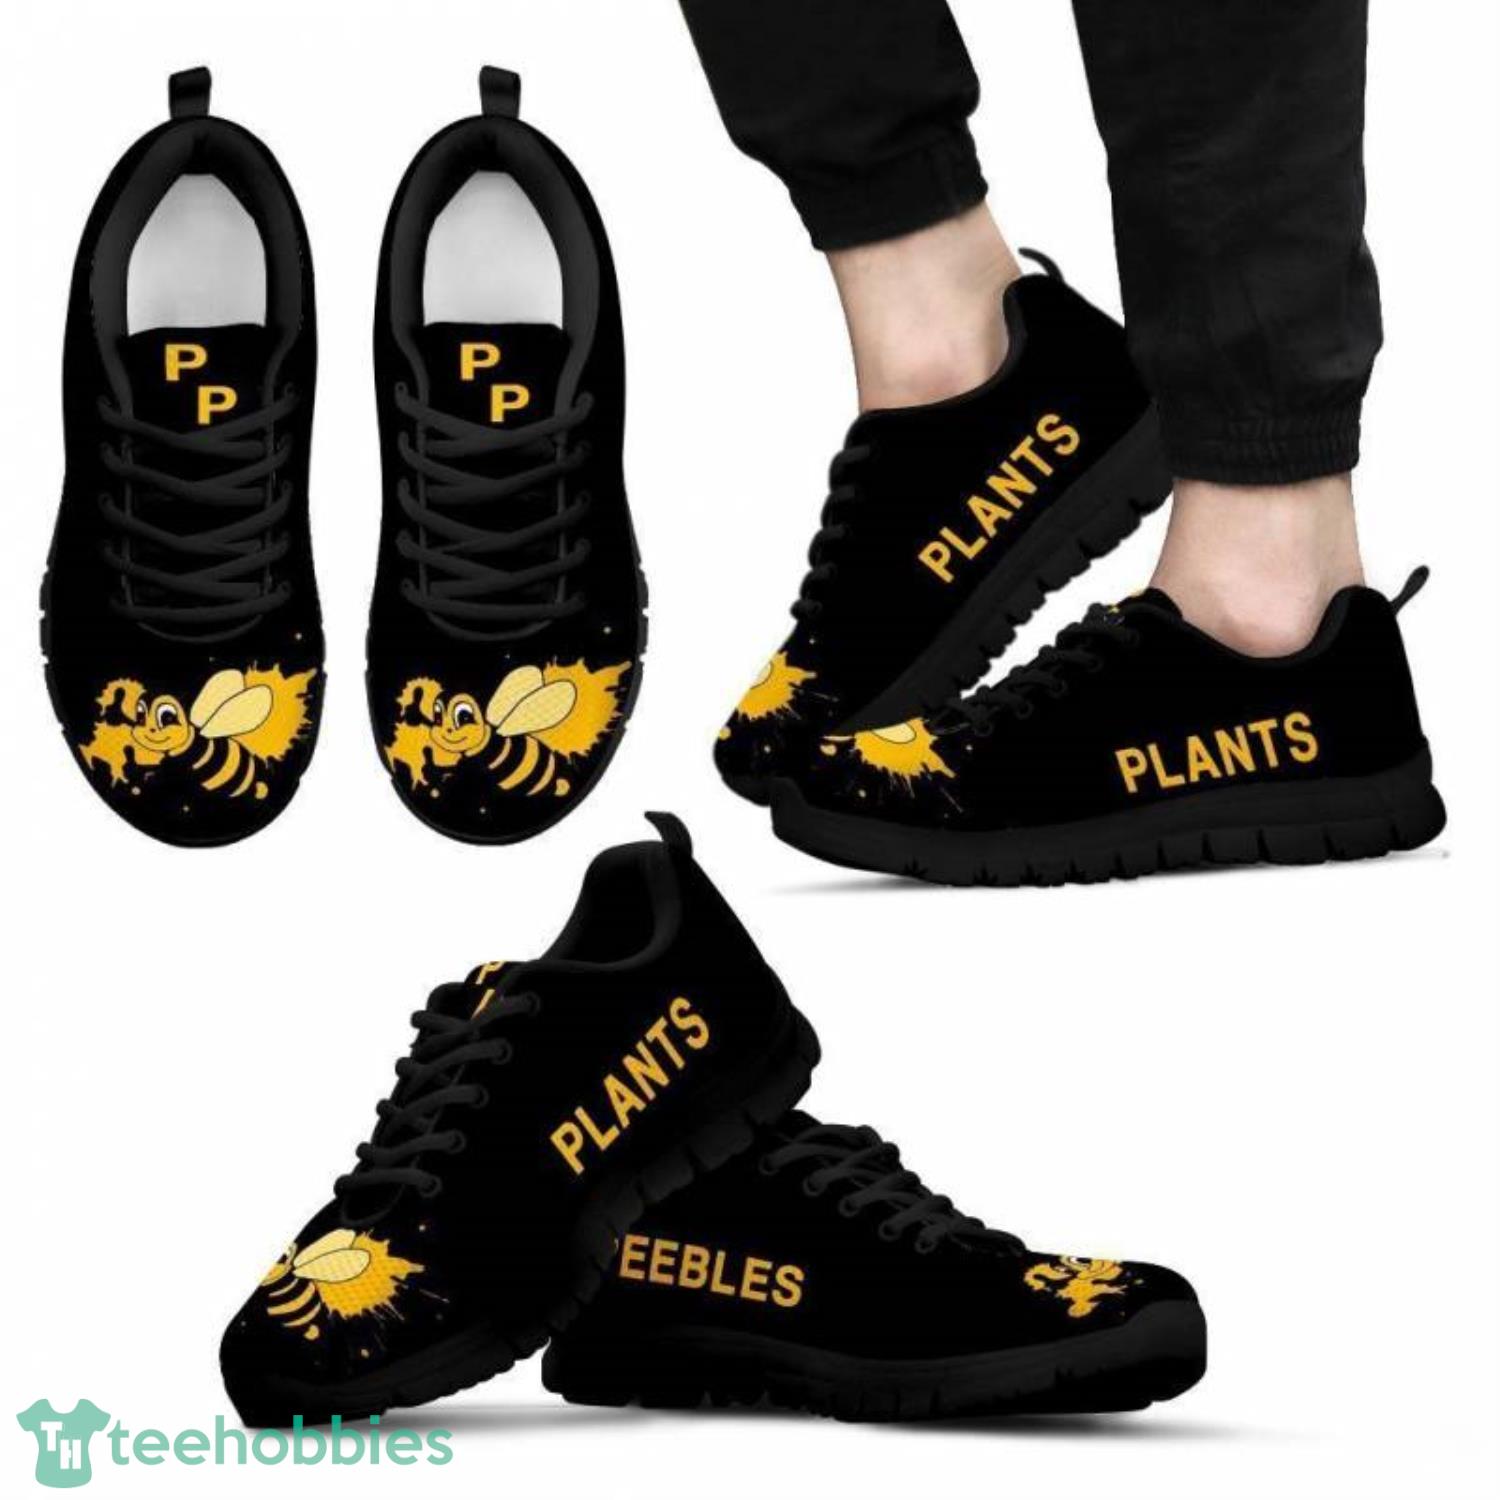 Peebles Cute Black Sneakers Shoes For Men And Women Product Photo 1